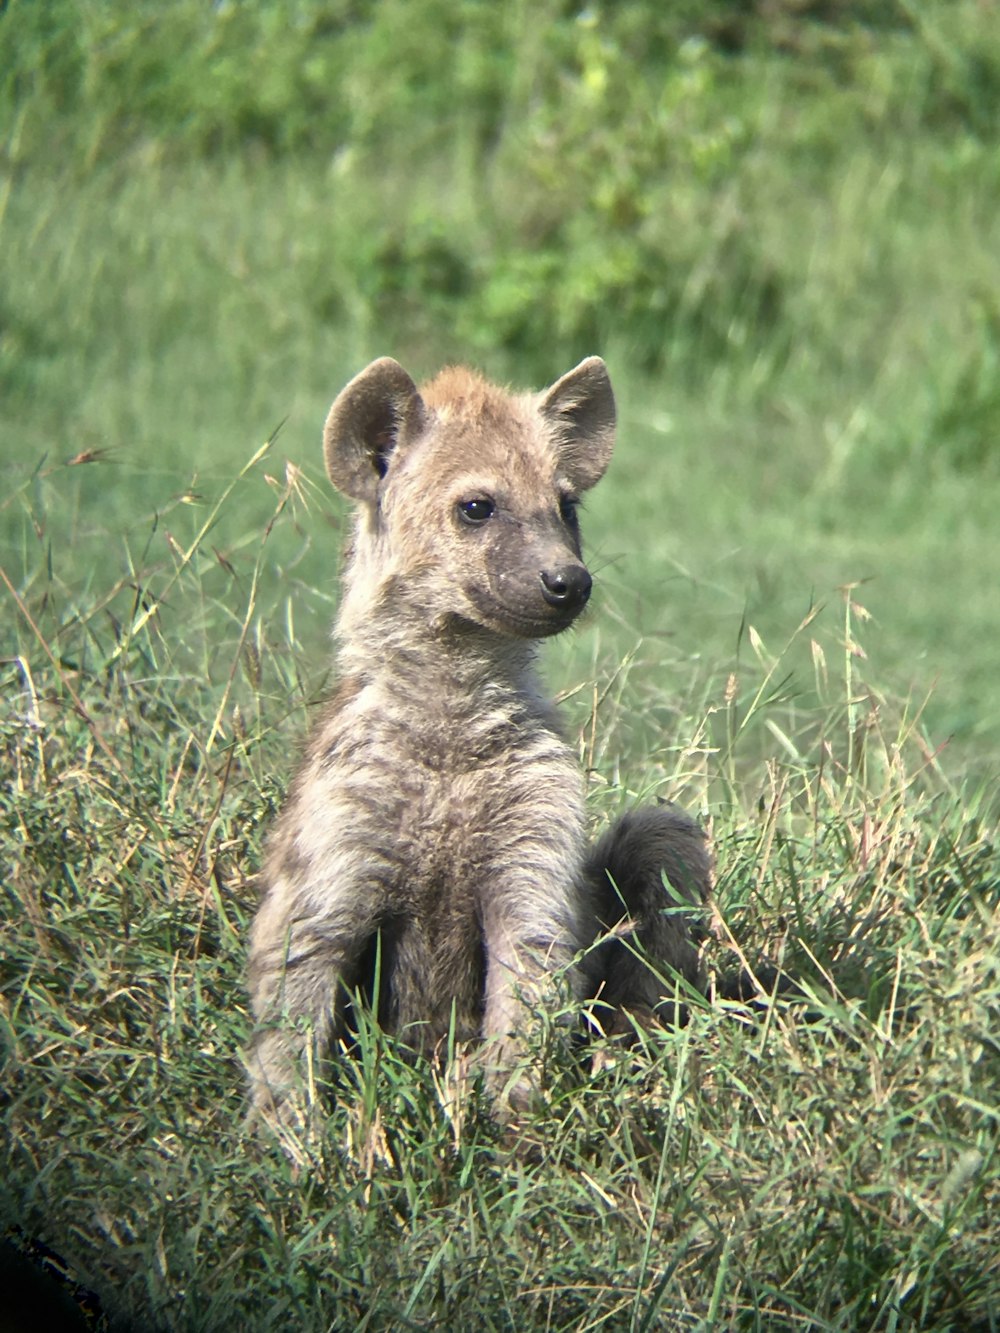 a baby hyena sitting in the grass